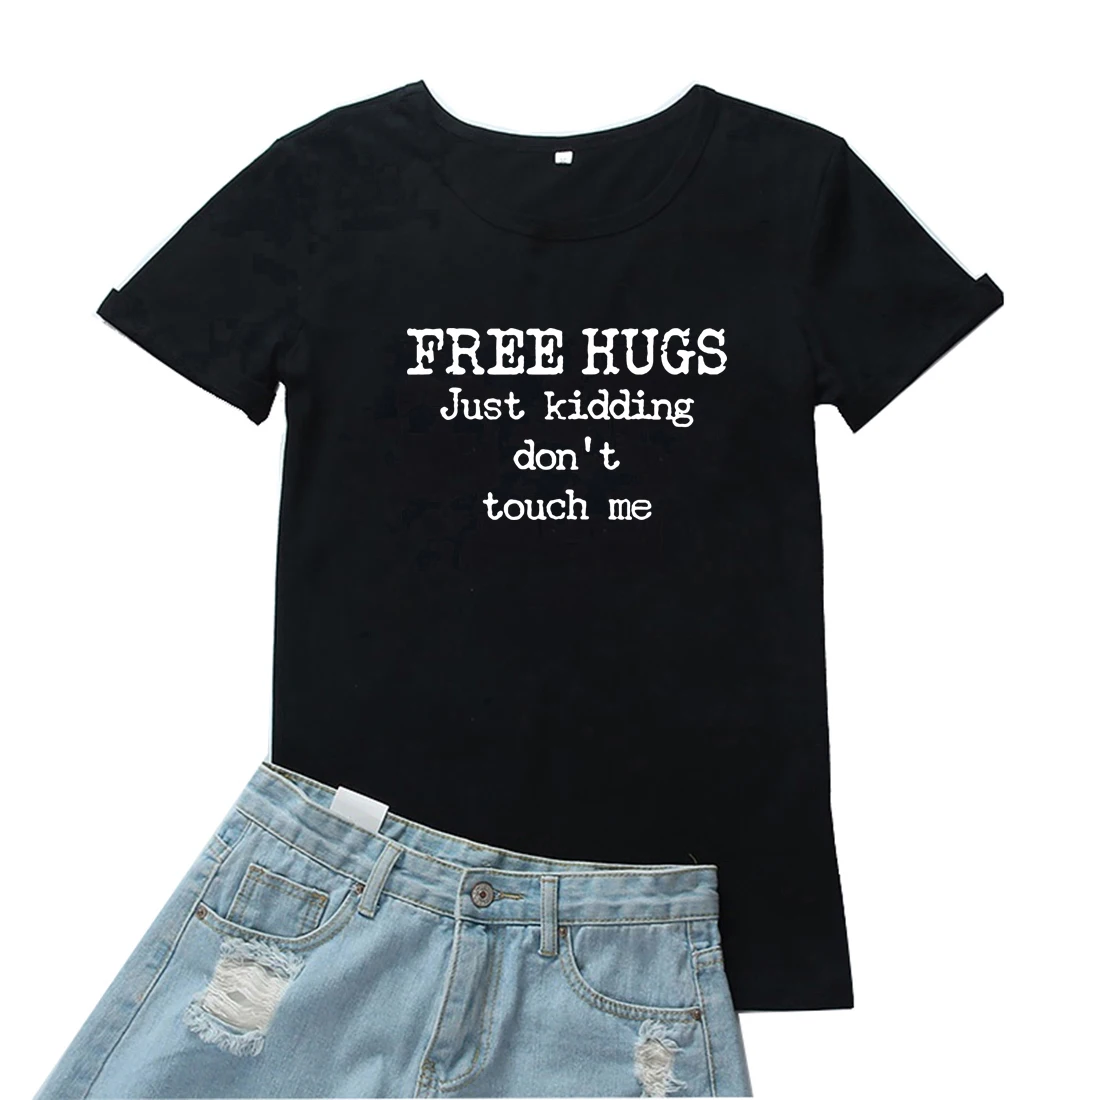 

Free Hugs Just Kidding Don't Touch Me Tee Shirt Femme Funny Letter Graphic Women T Shirt Cool O-Neck Tshirt Women Cotton Tops